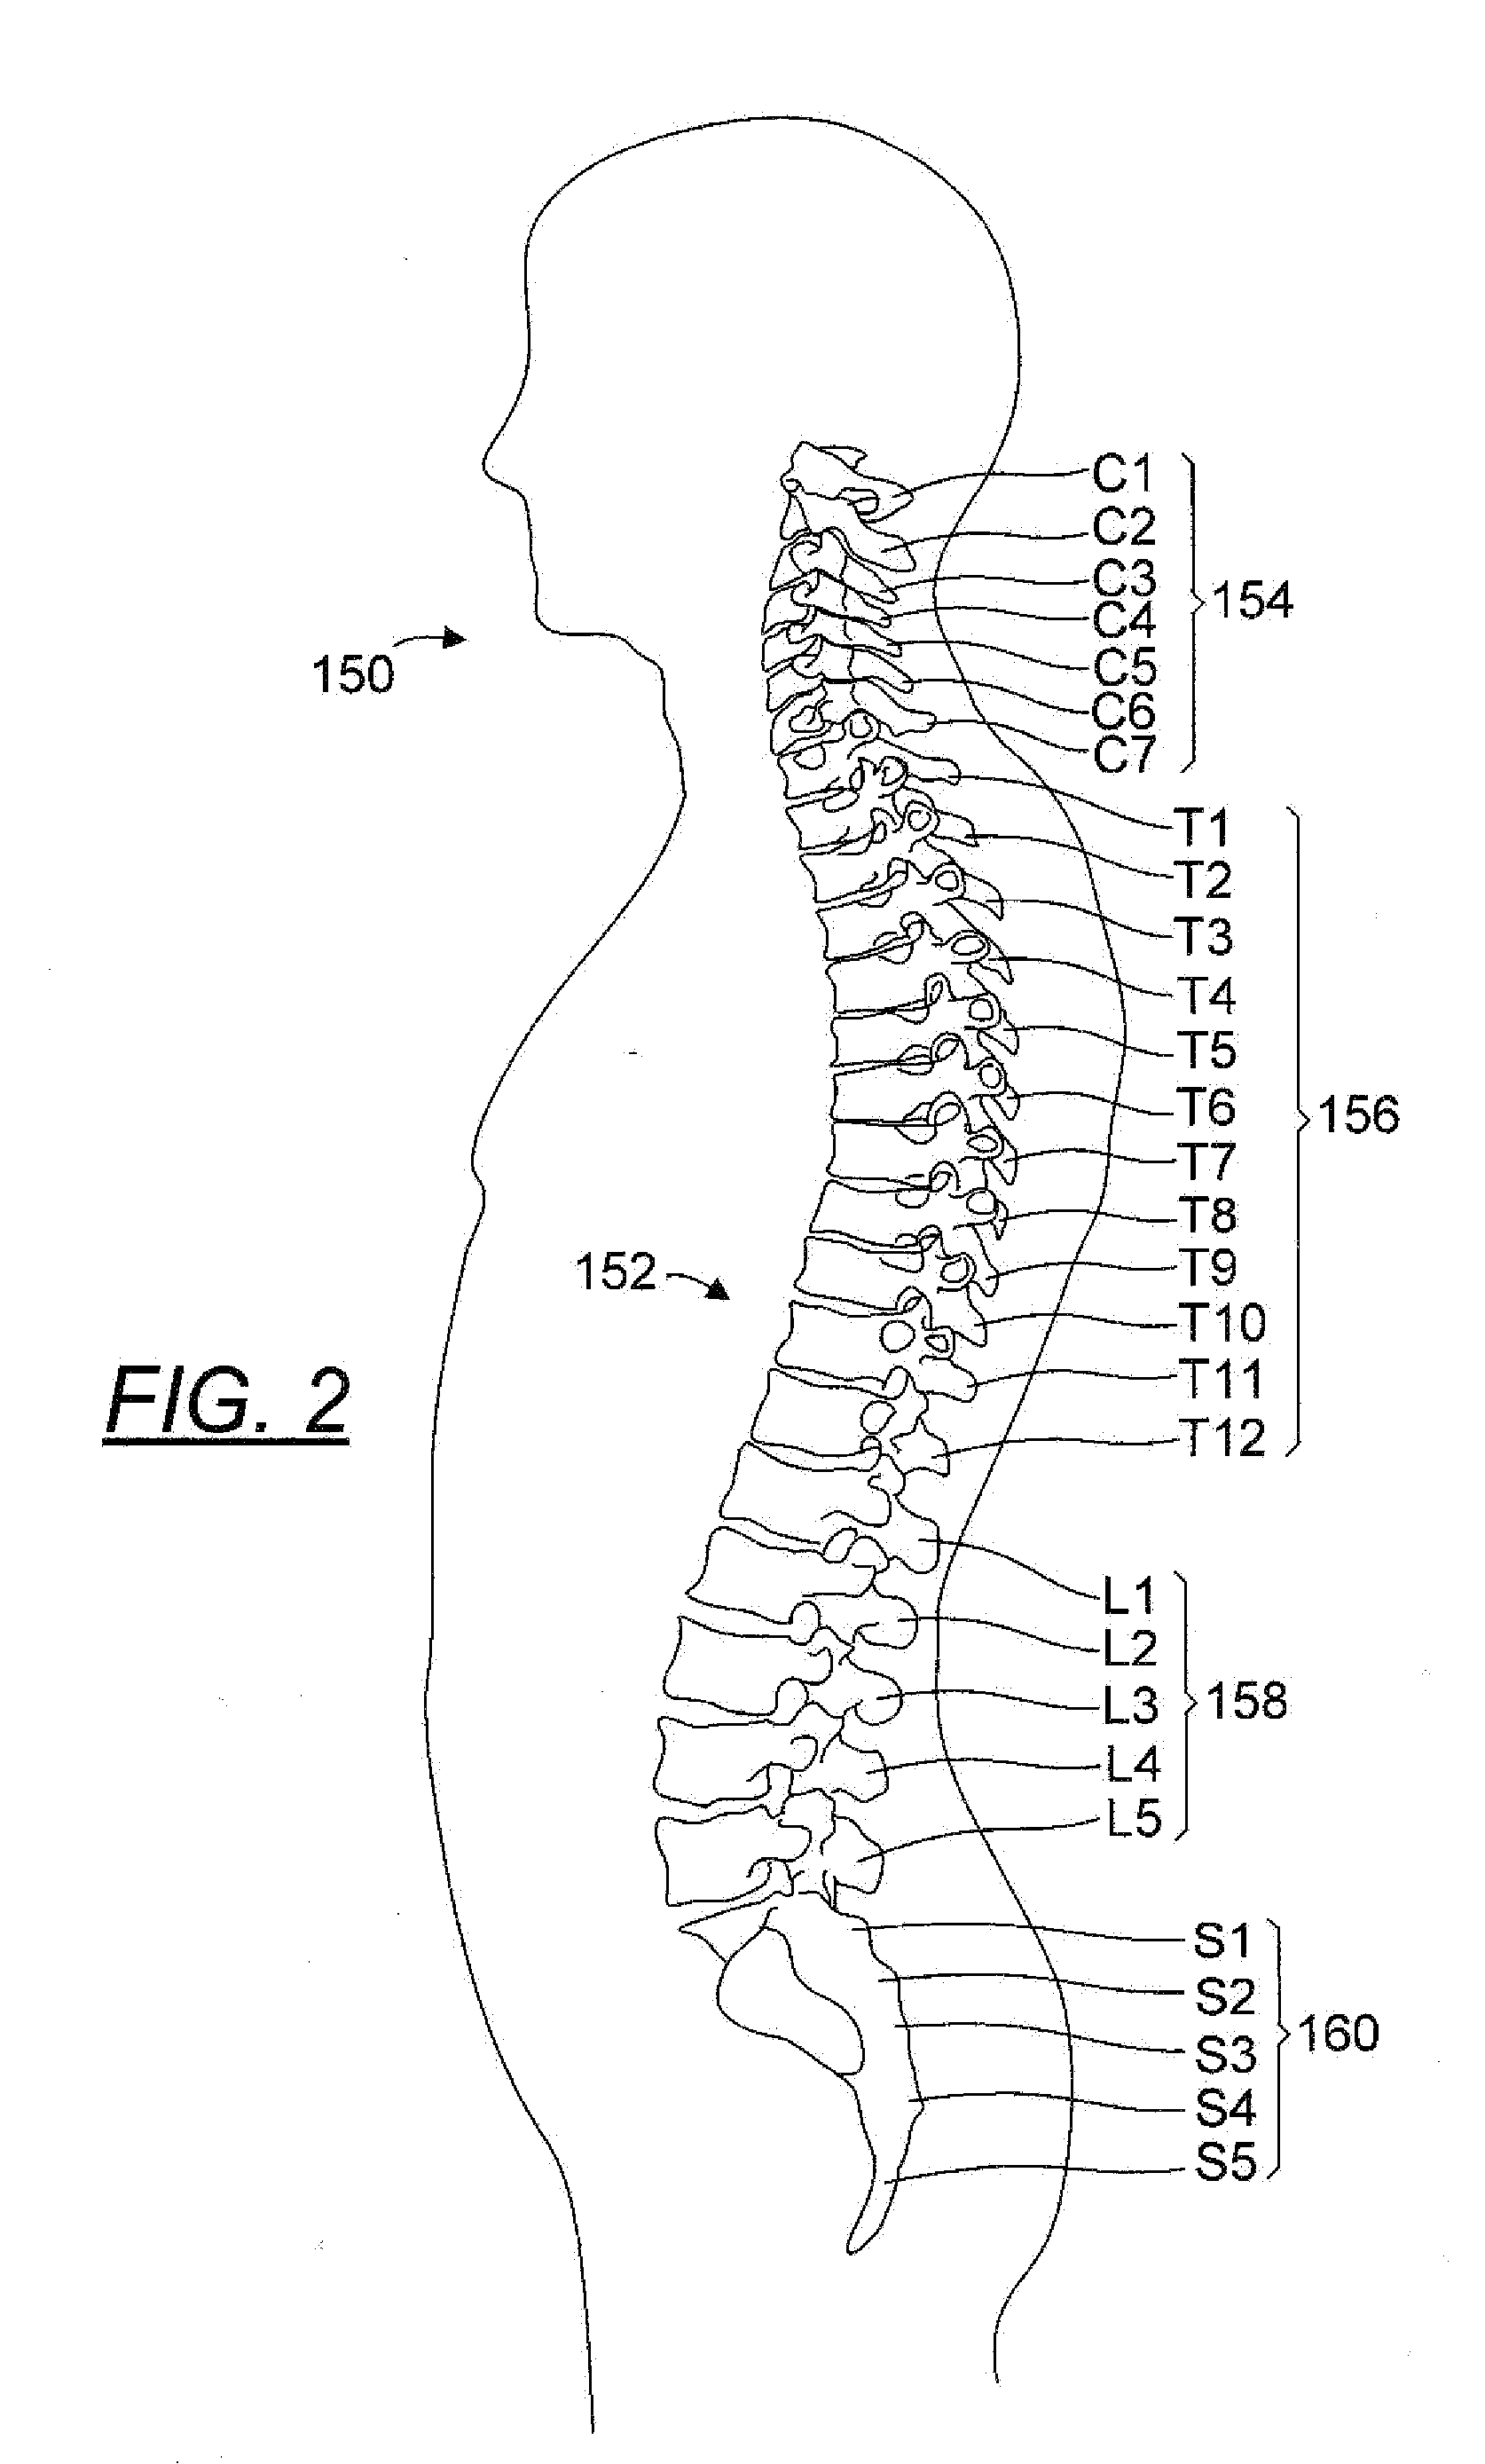 Garment for Providing Back Support and Thermal Therapy